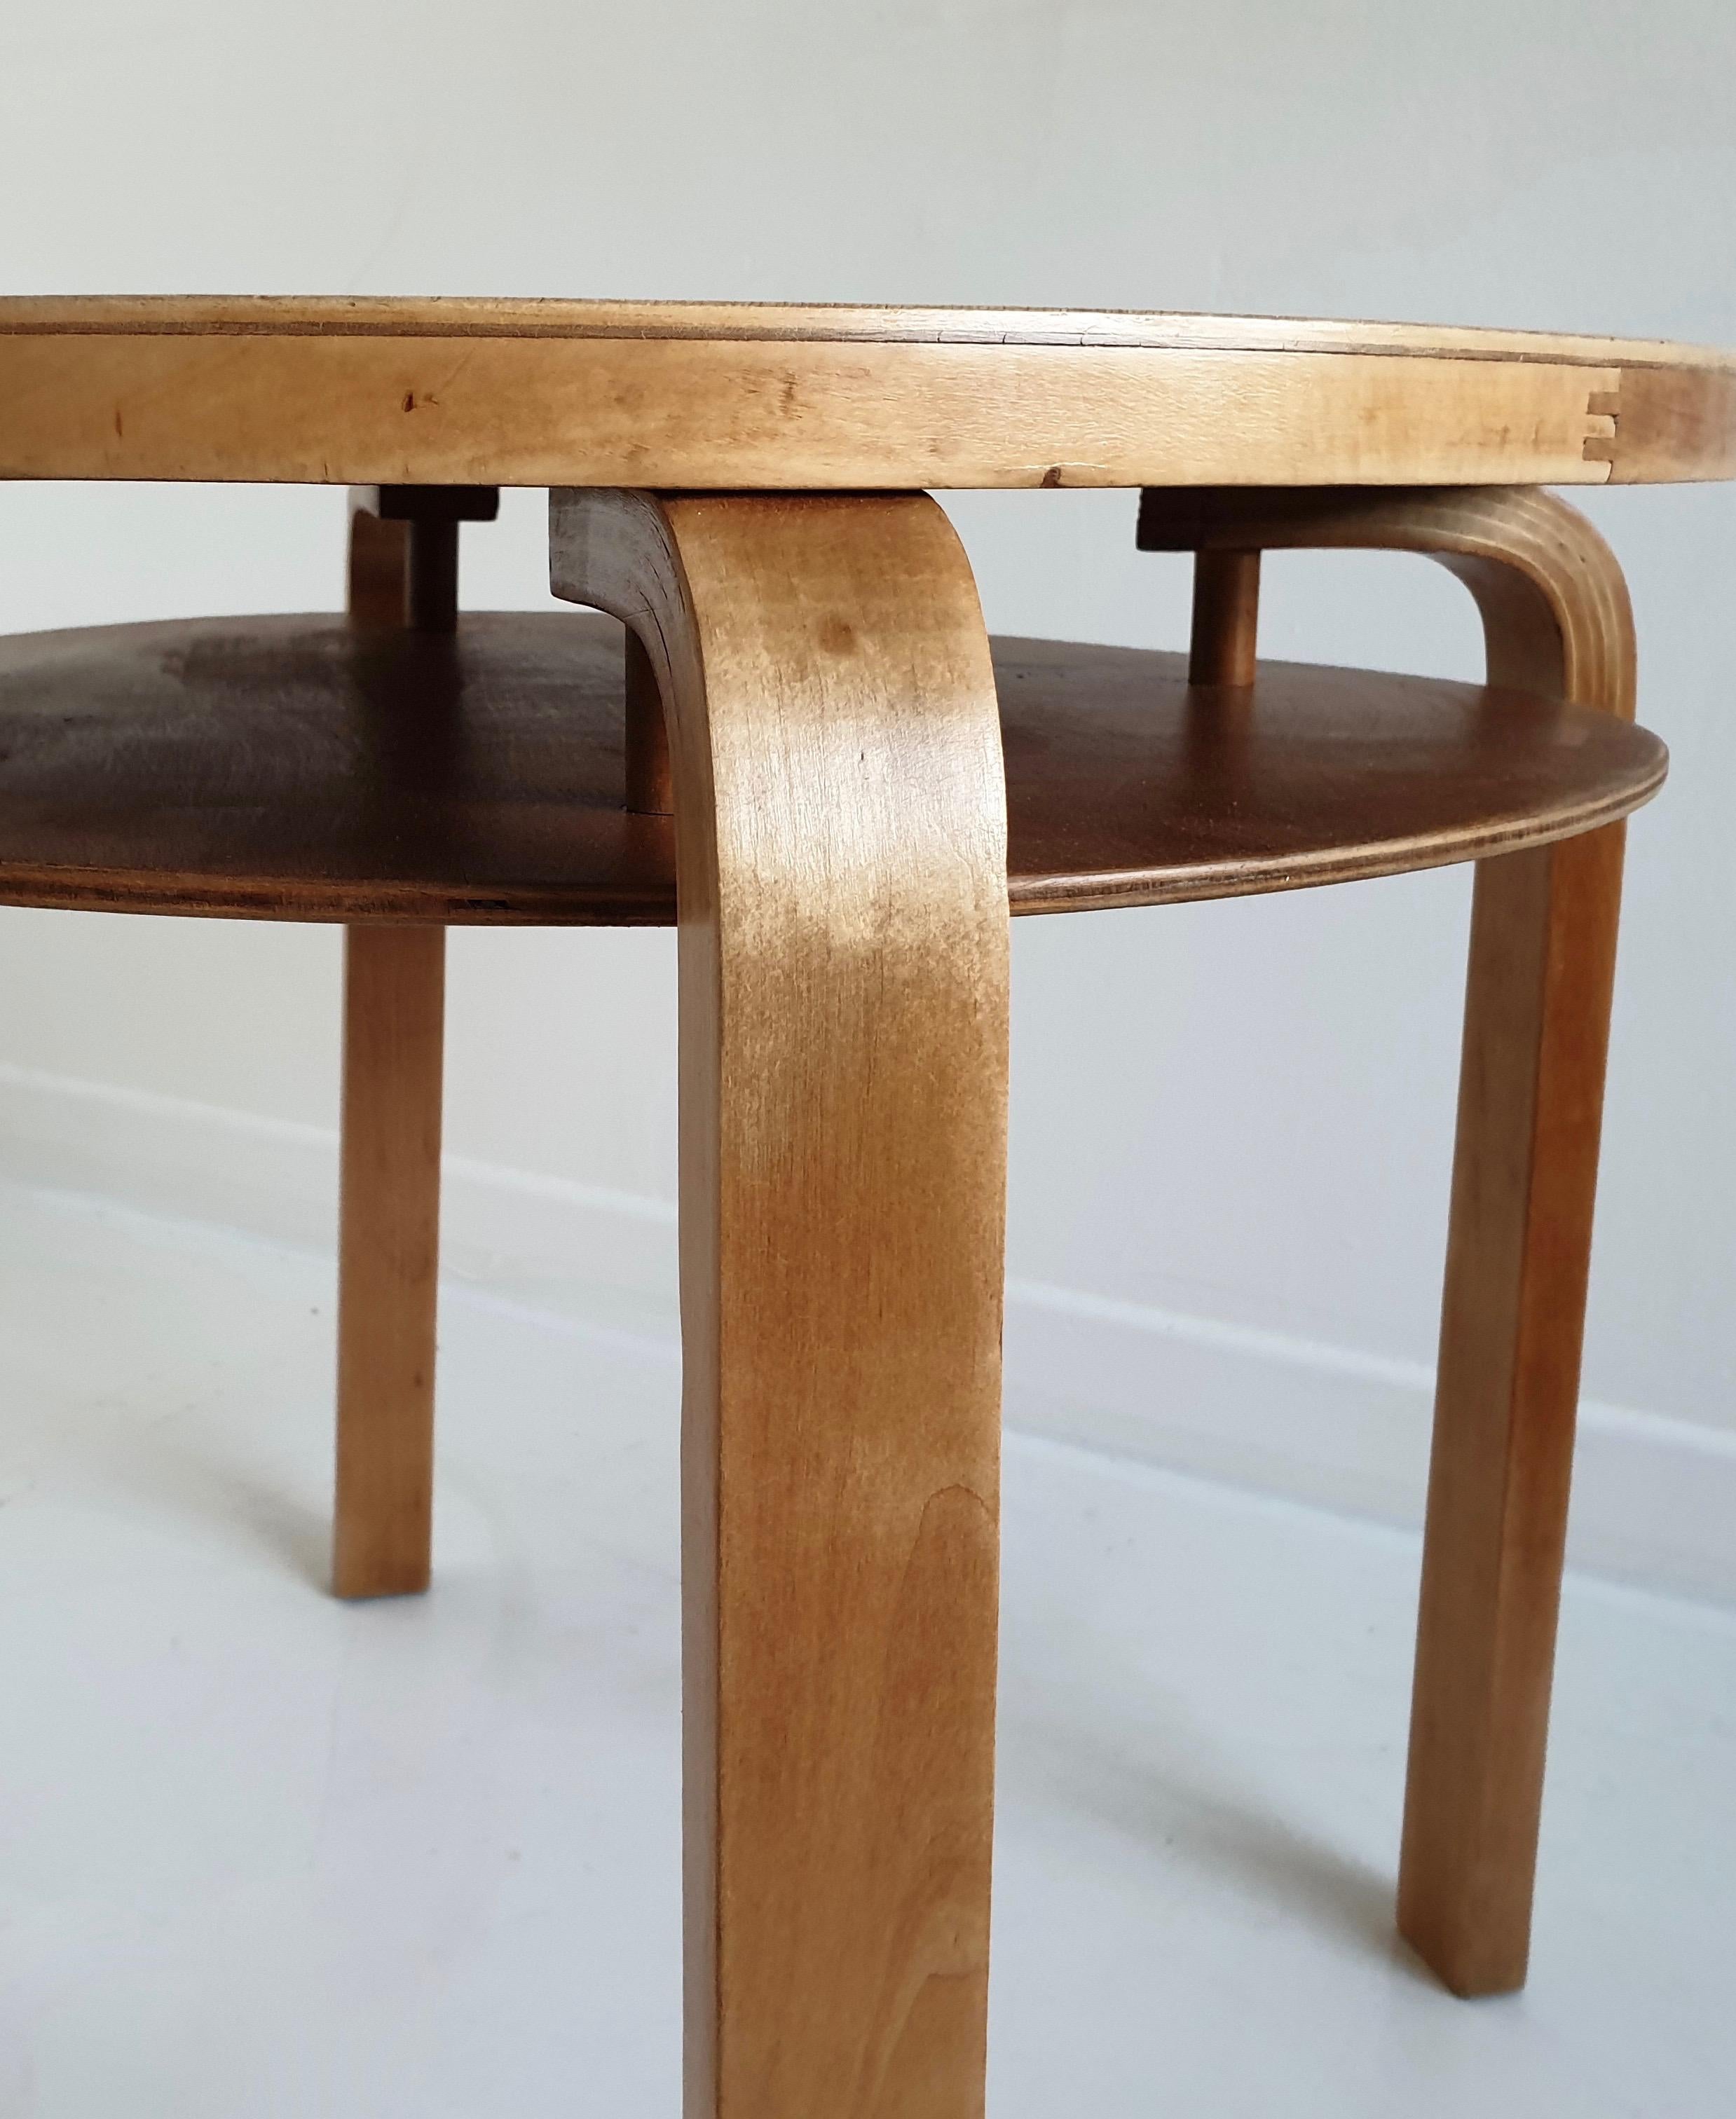 Pair of Rare '907' Stacking Side Tables by Alvar Aalto for Artek, circa 1940 In Good Condition For Sale In London, GB